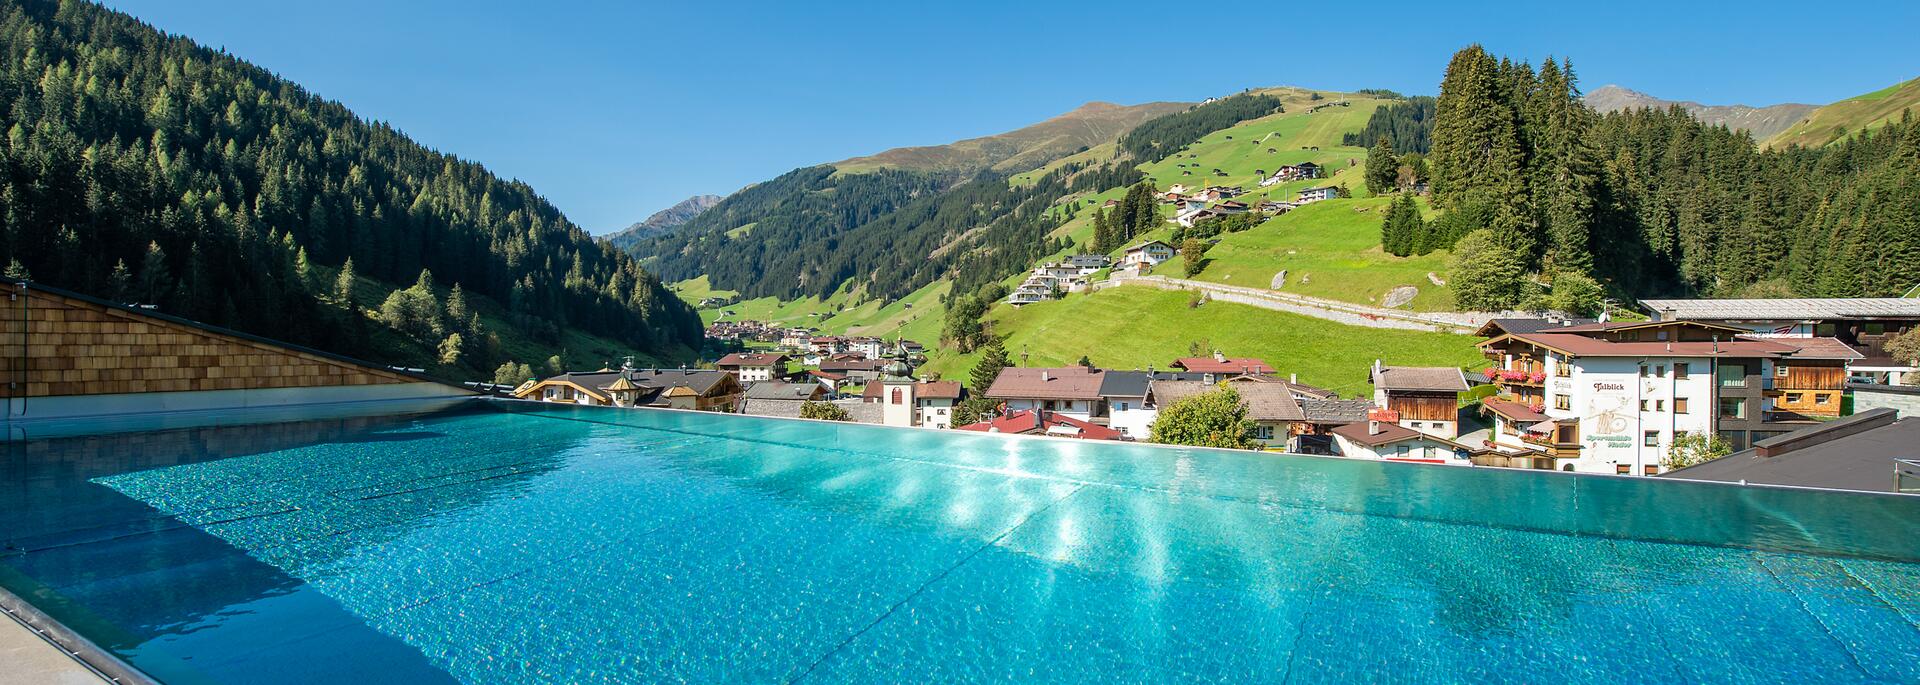 roof top pool in the Tyrol Alps